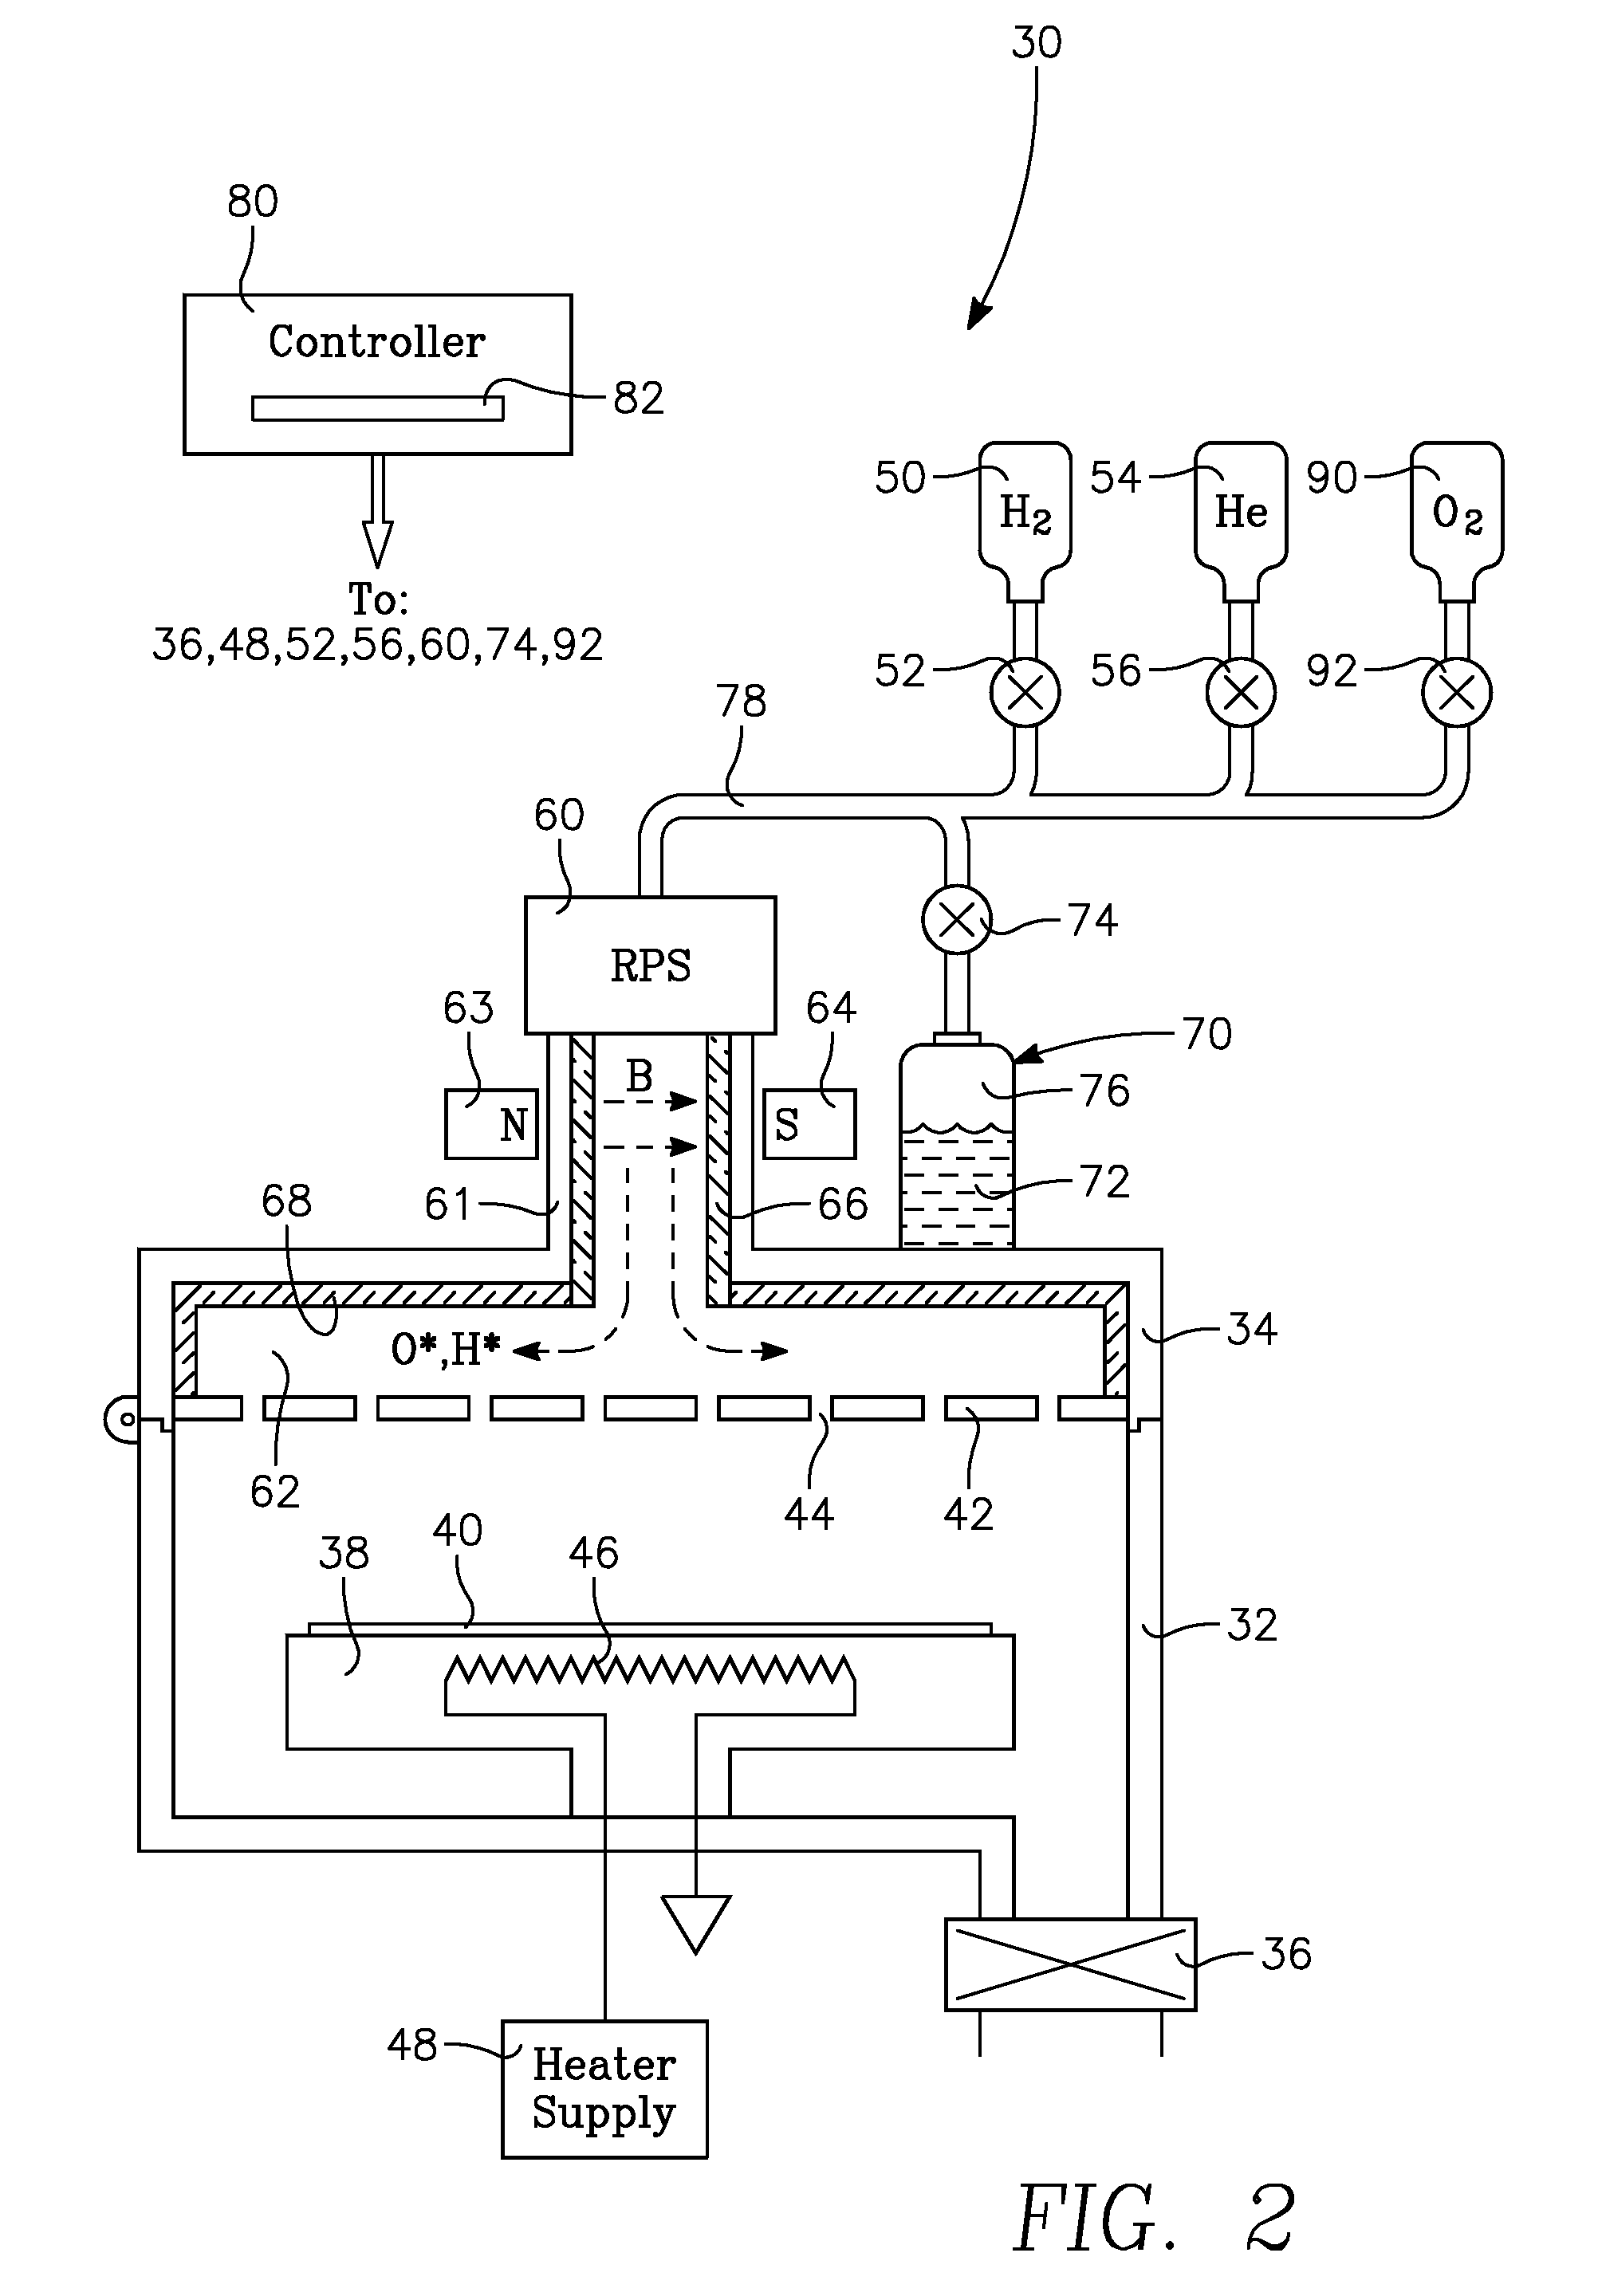 Remote Plasma Source for Pre-Treatment of Substrates Prior to Deposition